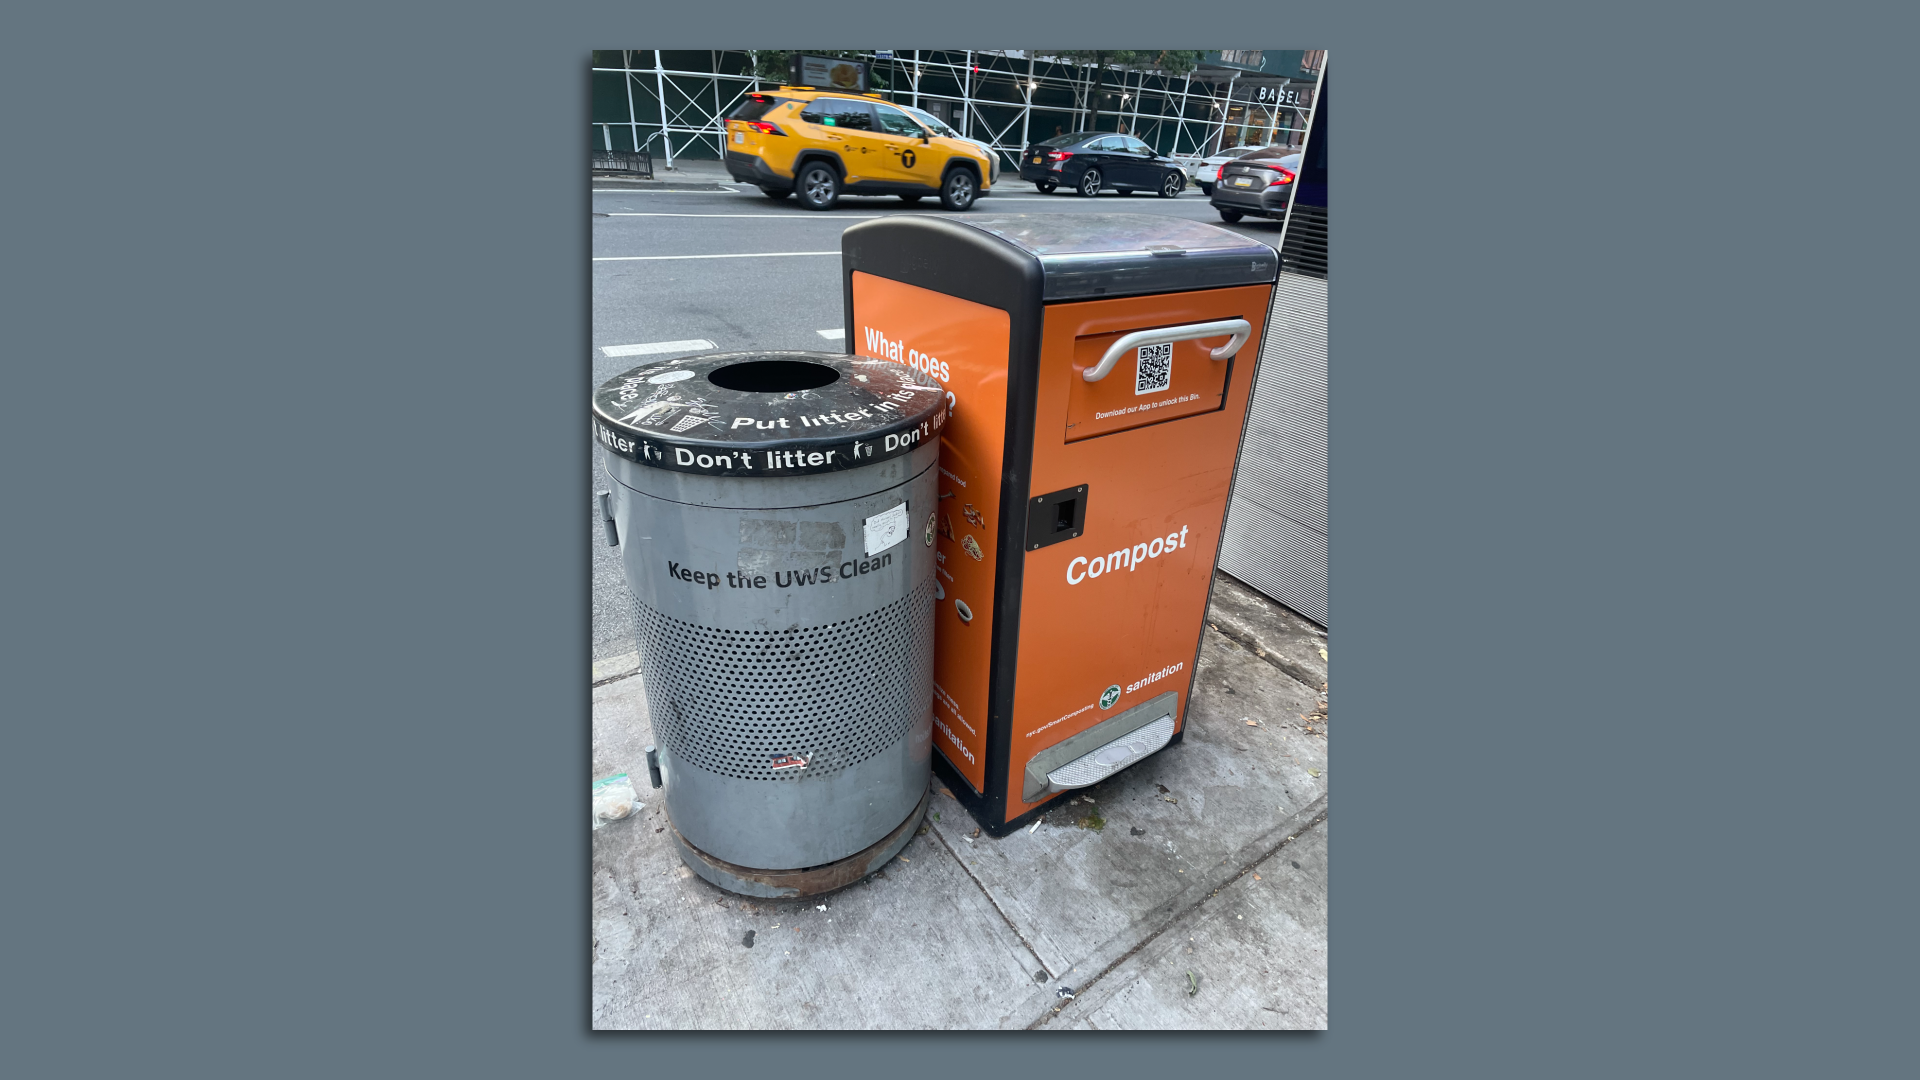 A compost bin on a New York City street stands next to a recycling bin.